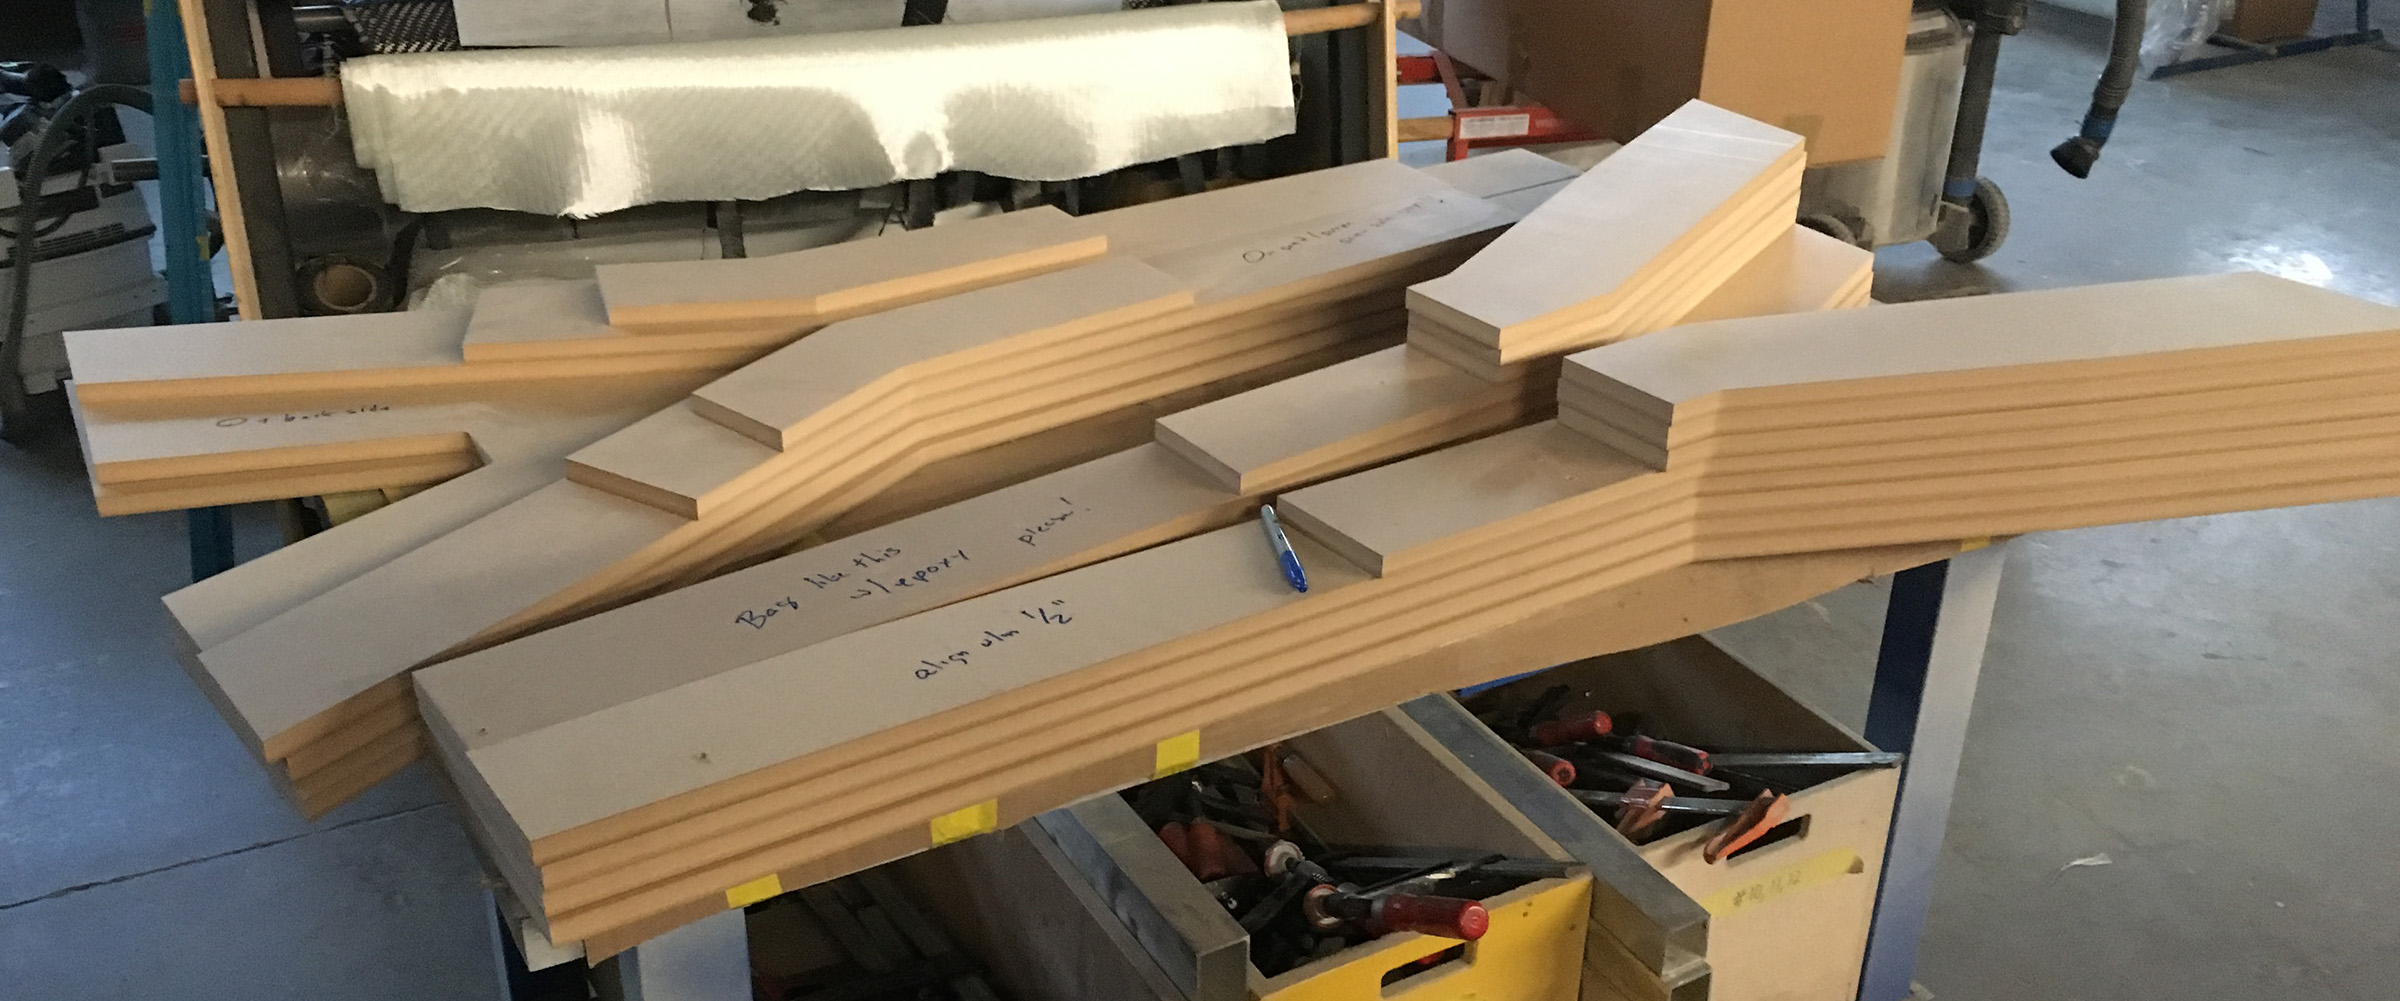 MDF for a bowsprit mold